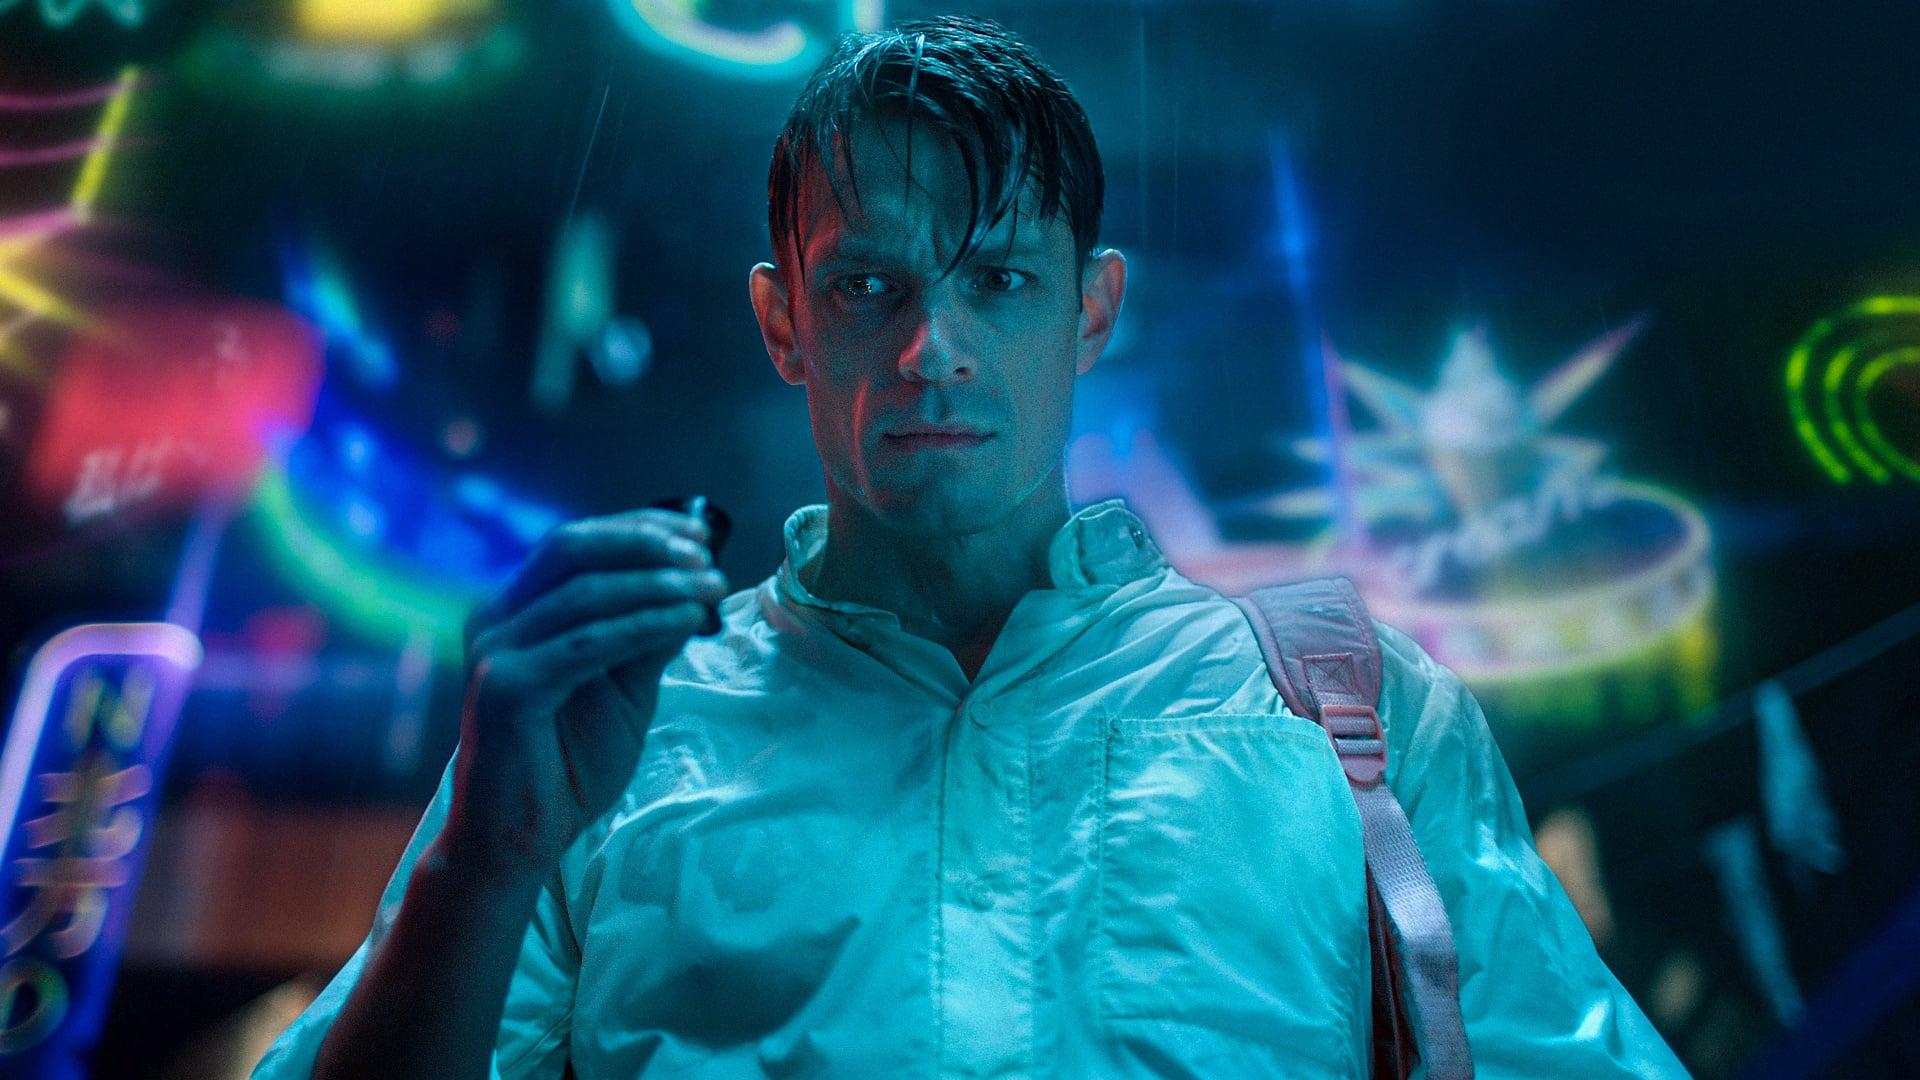 Altered carbon season 2, Kovacs Soon to be seen in new 'slews'